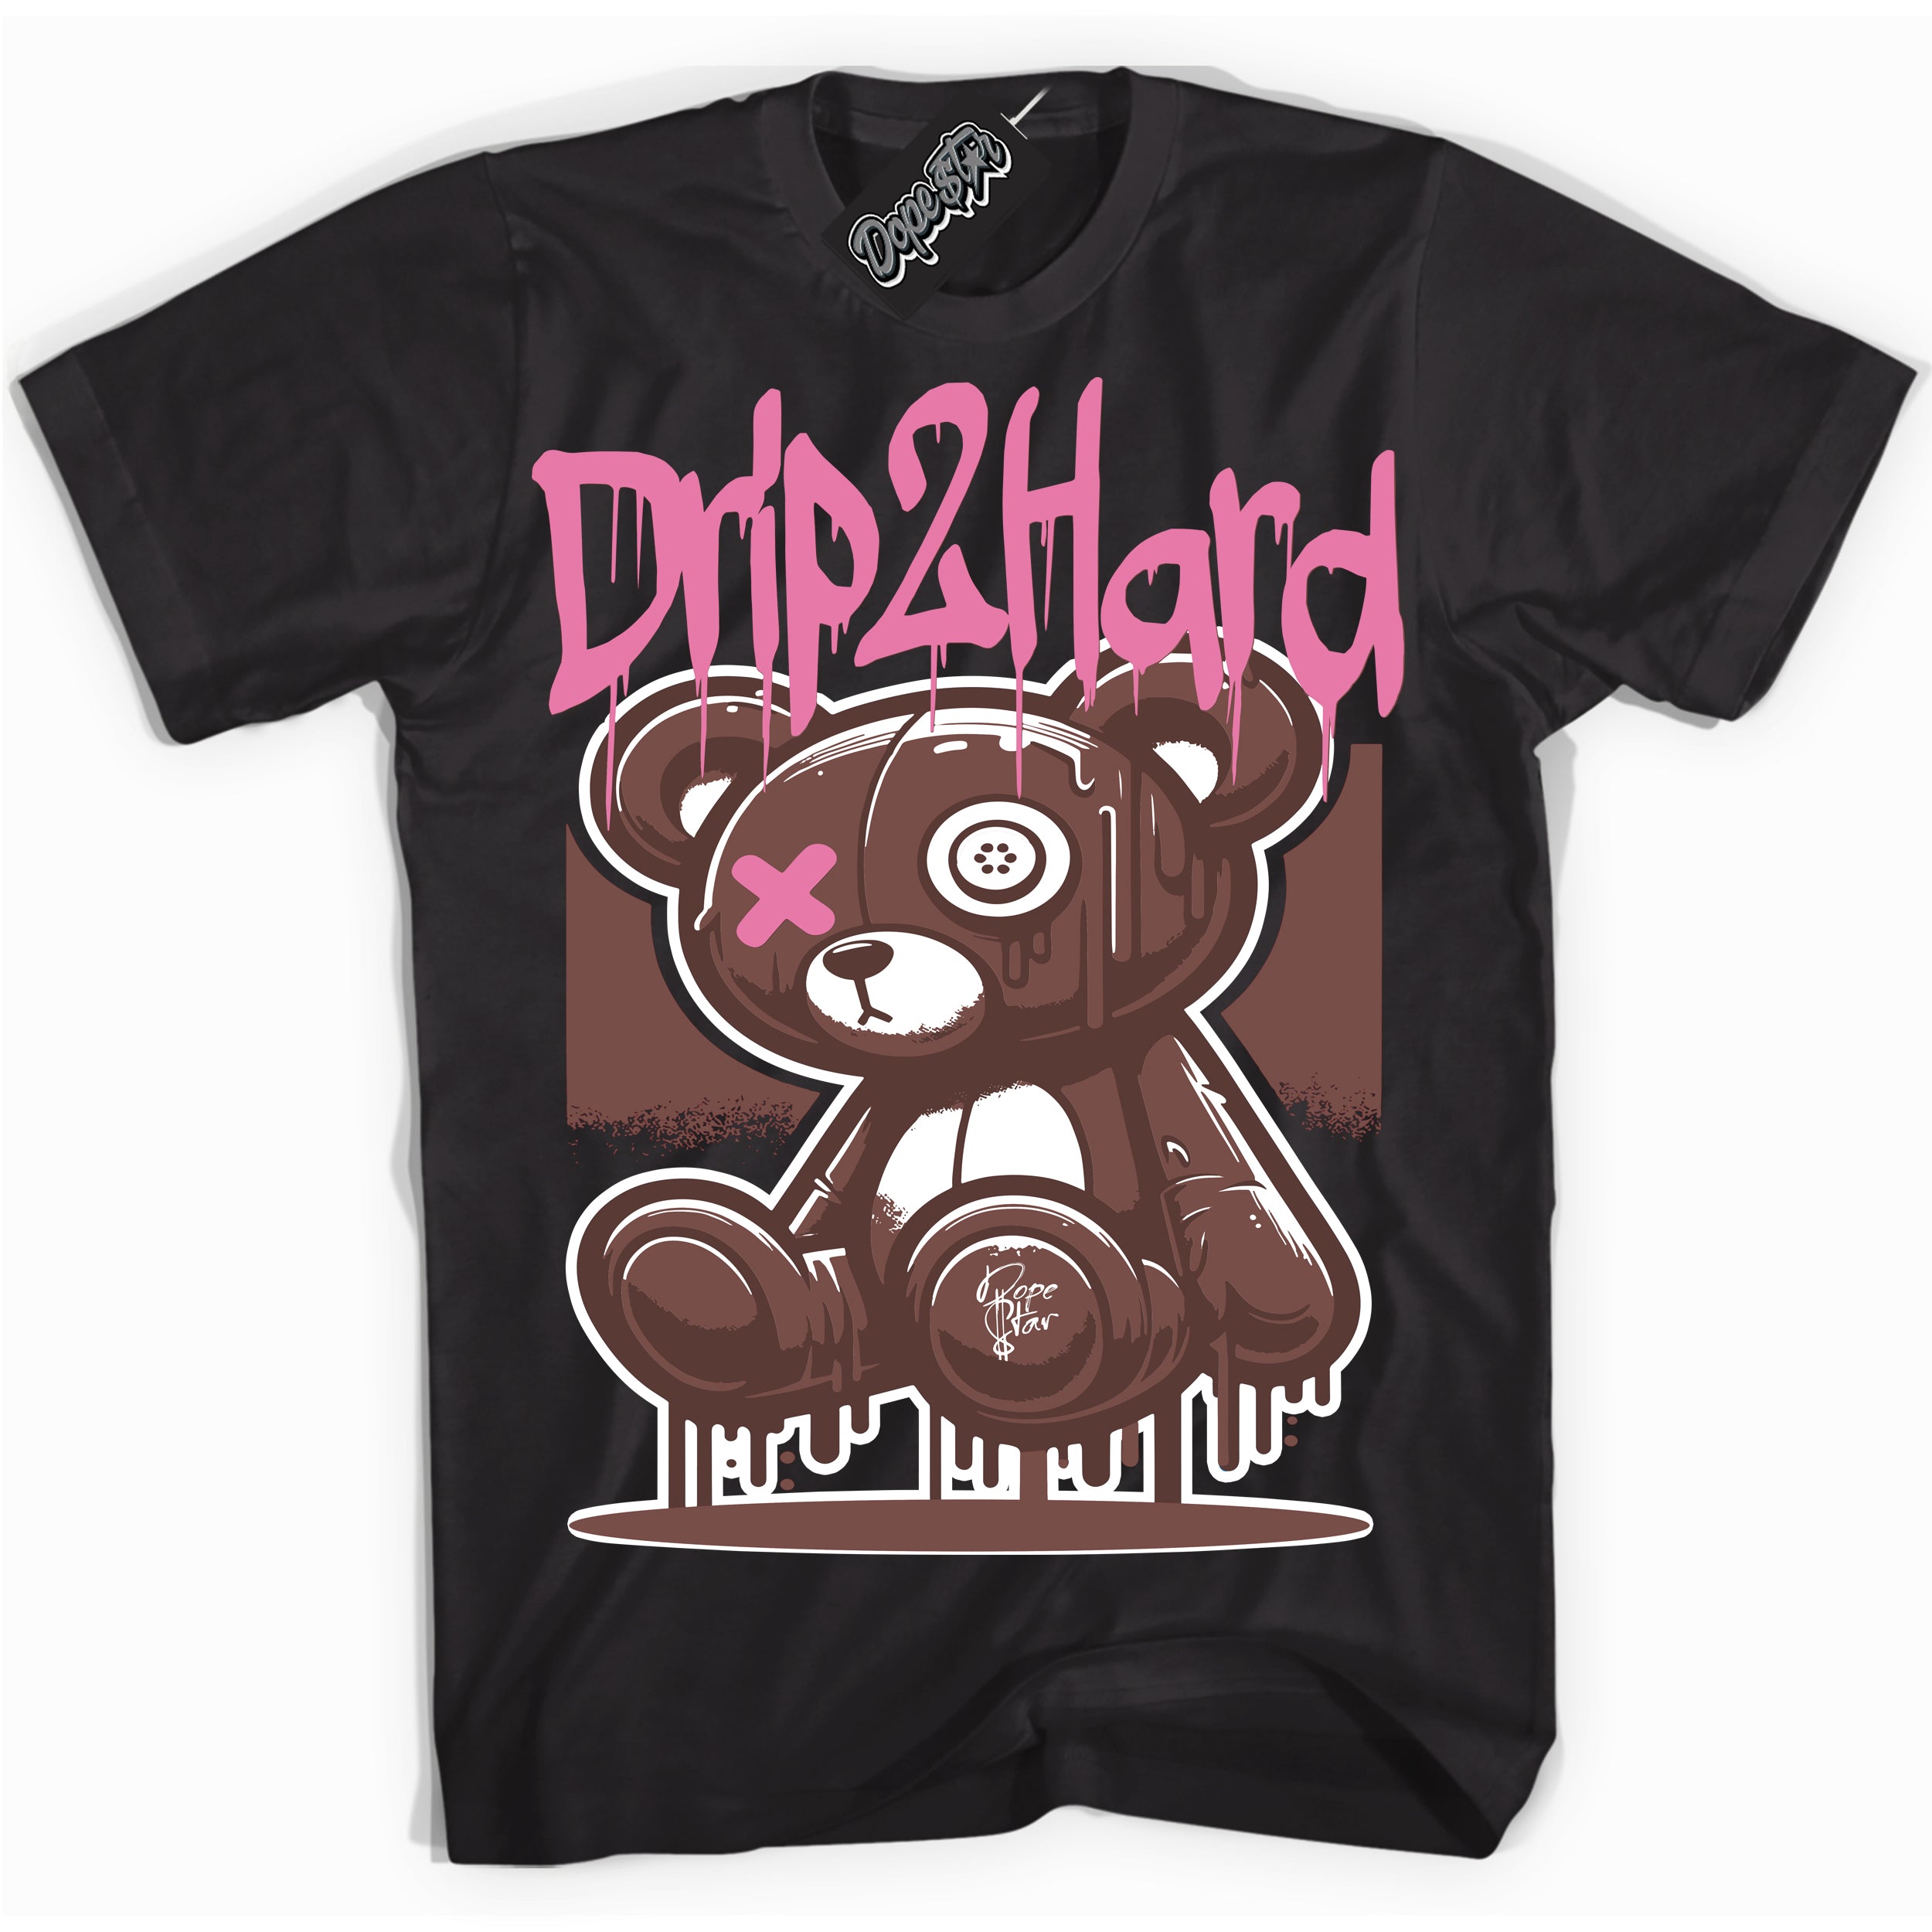 Cool Black graphic tee with “ Drip 2 Hard ” design, that perfectly matches Smokey Mauve W